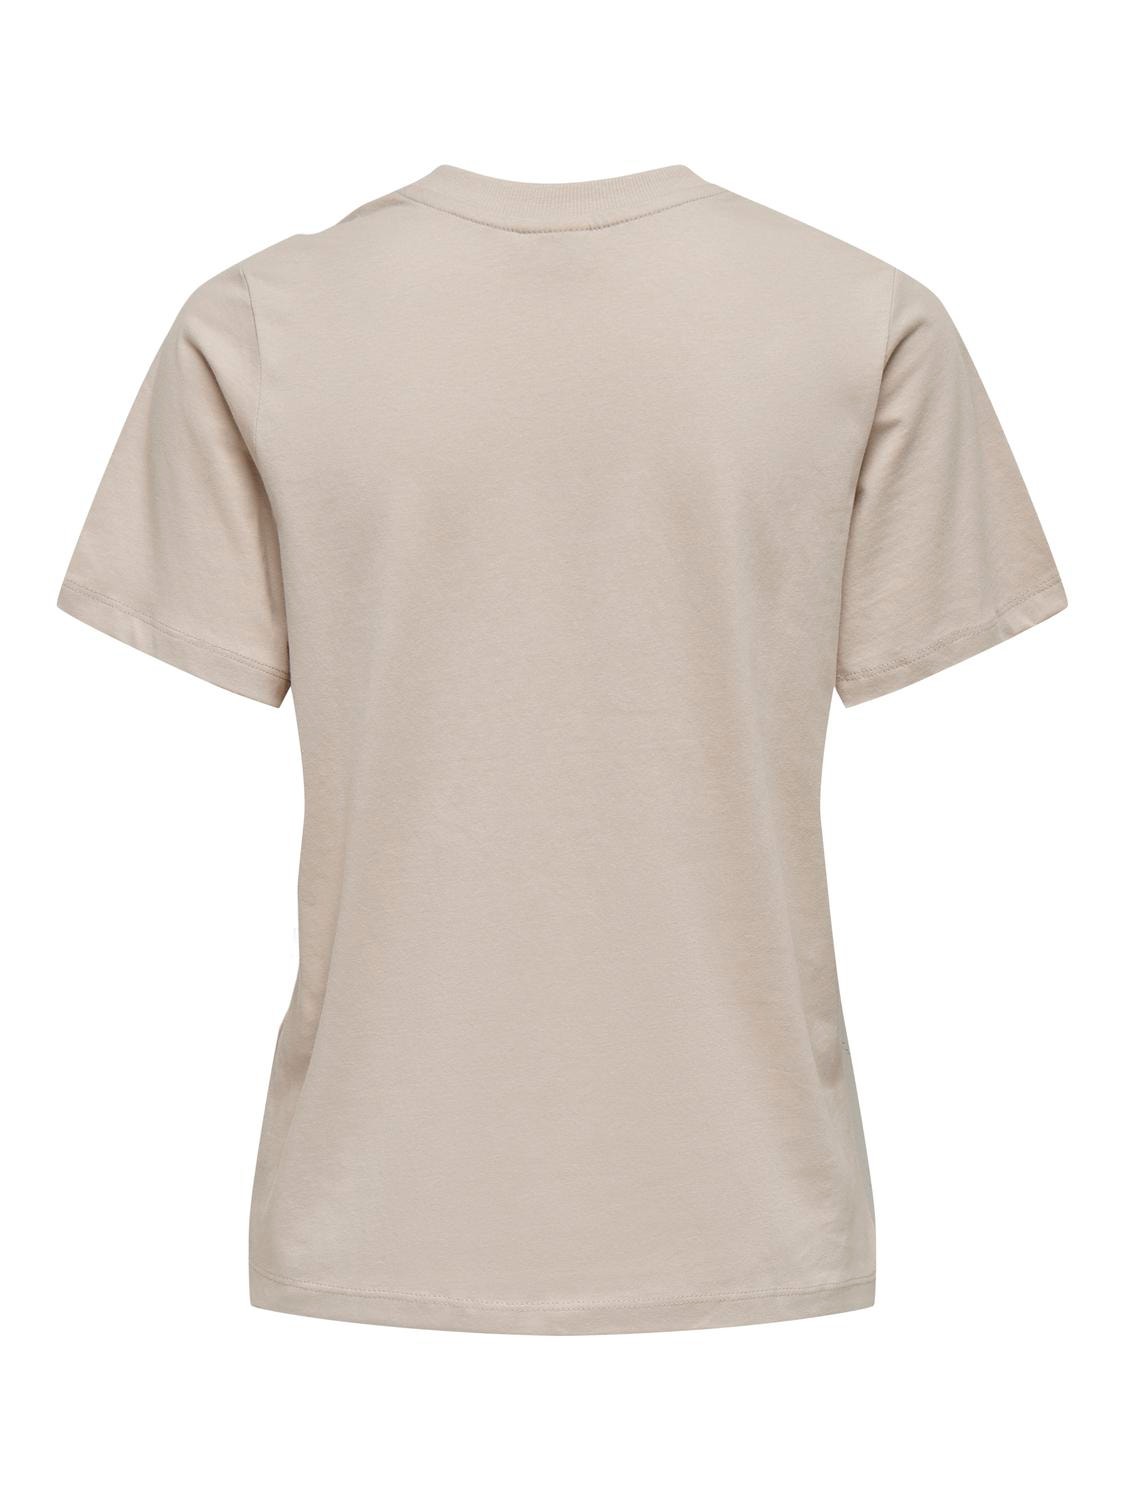 ONLY o-neck t-shirt -Chateau Gray - 15292431